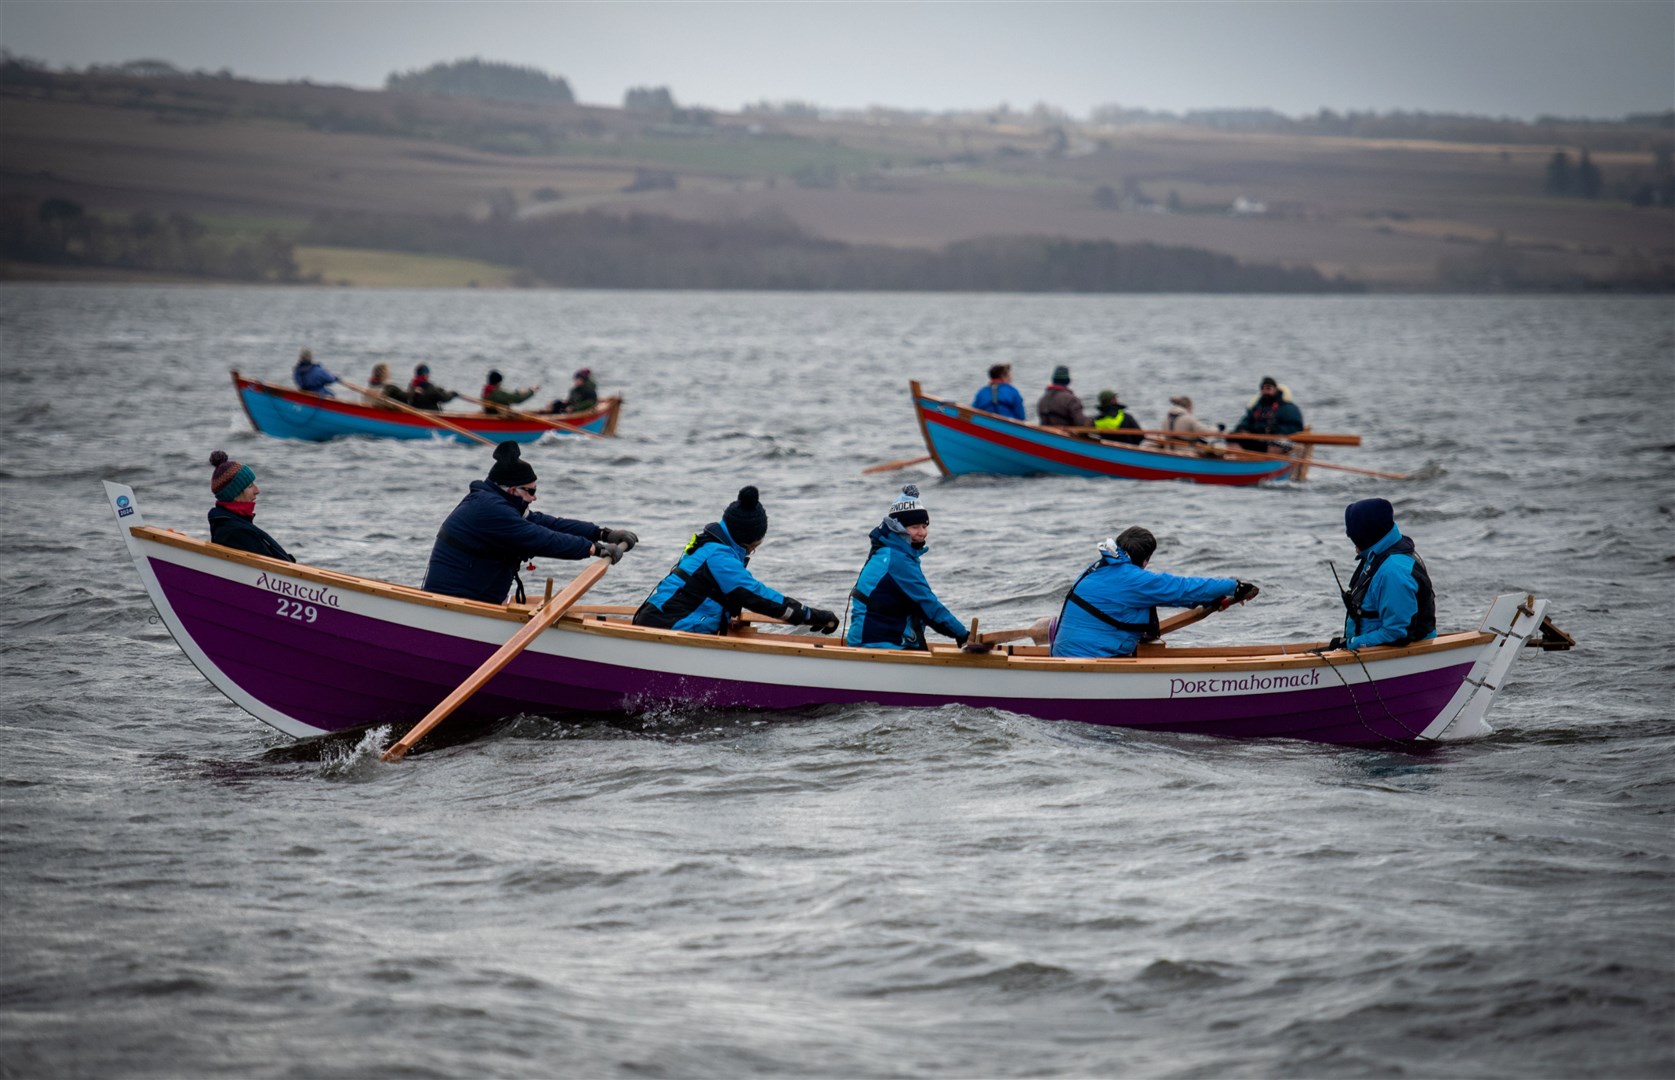 A supportive community of like-minded people has built up around the sport in Ross-shire - as seen here at a launch near Storehouse of Foulis.Picture: Callum Mackay